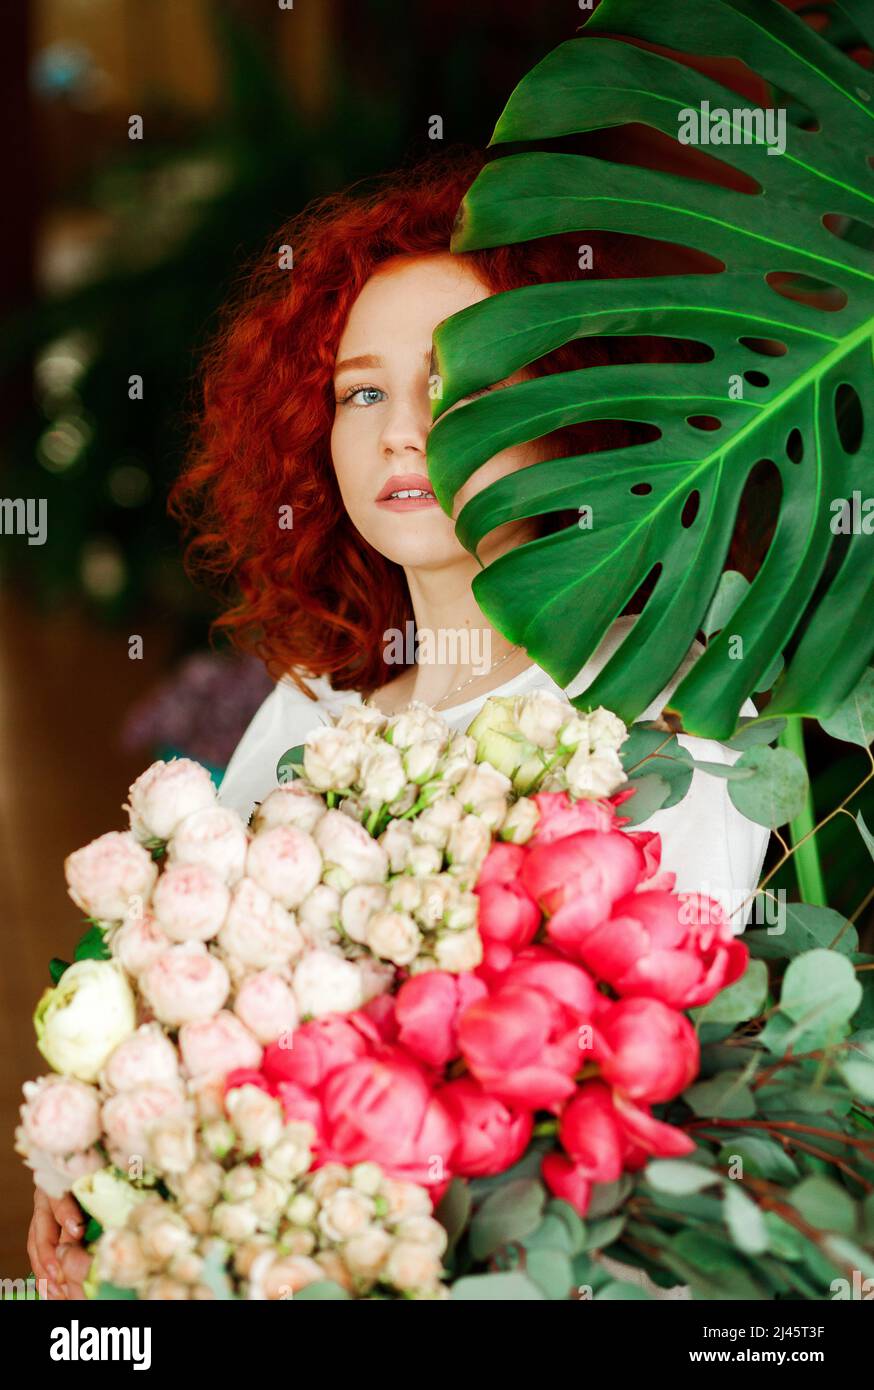 Portrait of a beautiful red-haired curly girl with a bouquet of spring flowers in her hands, hiding part of her face behind a green leaf with a flower Stock Photo